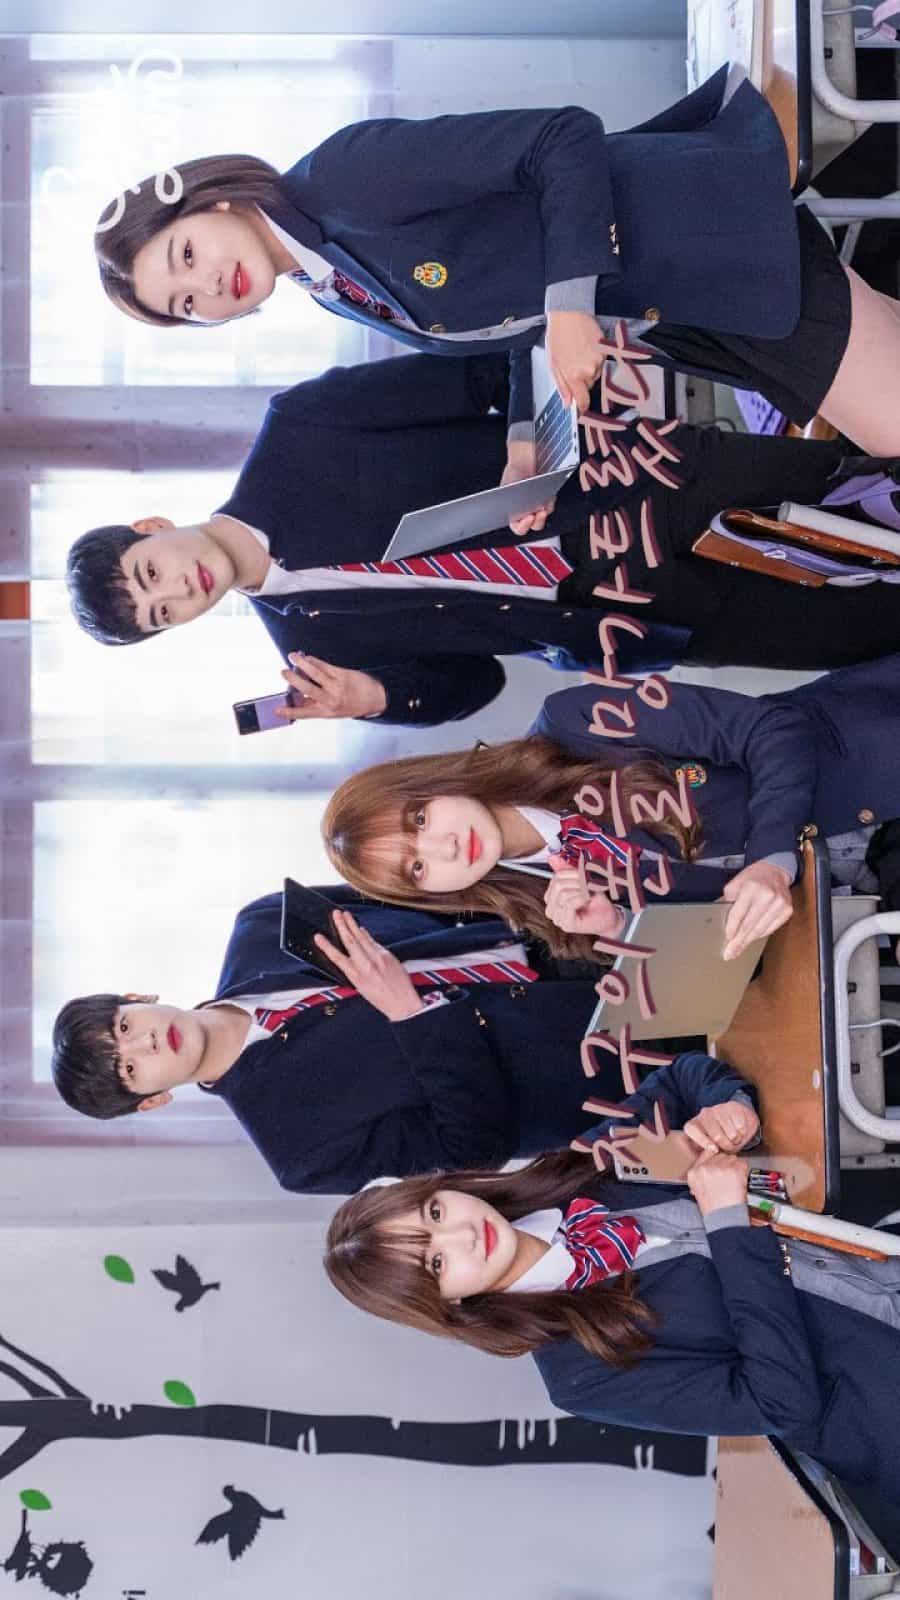 I Broke My Friend's Smartphone - Sinopsis, Pemain, OST, Episode, Review